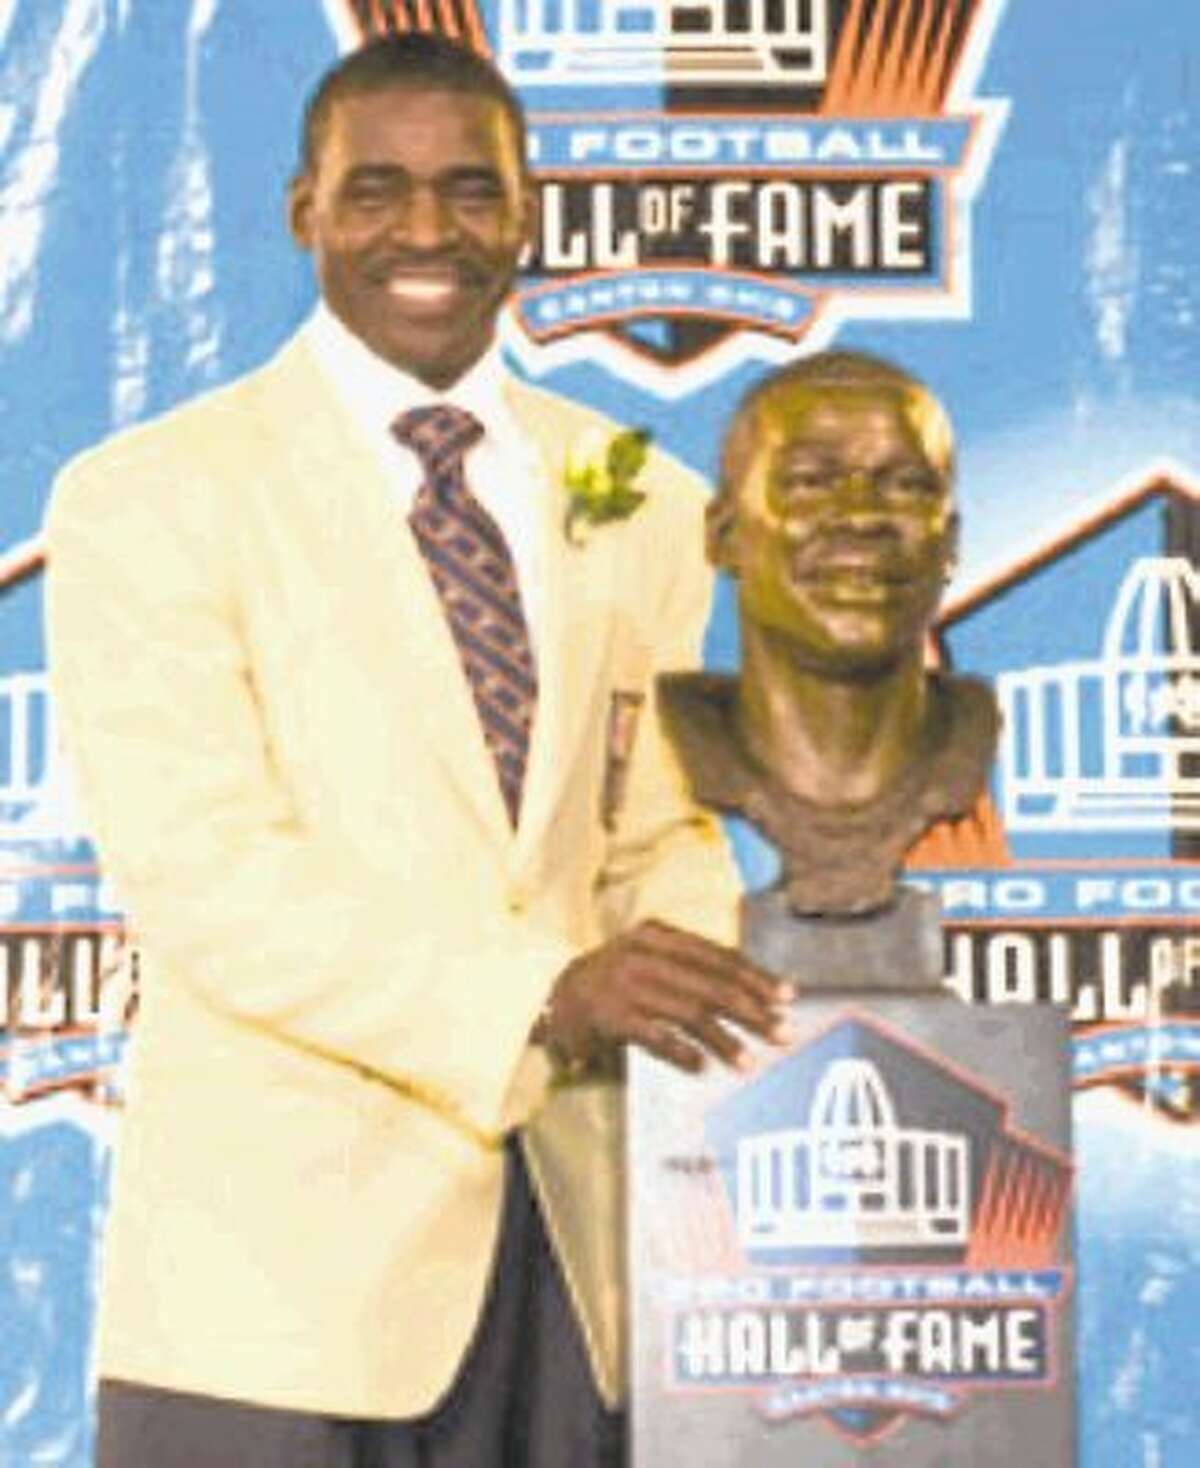 Michael Irvin poses for a media photo following his announcement as a member of the Pro Football Hall of Fame’s Class of 2007.